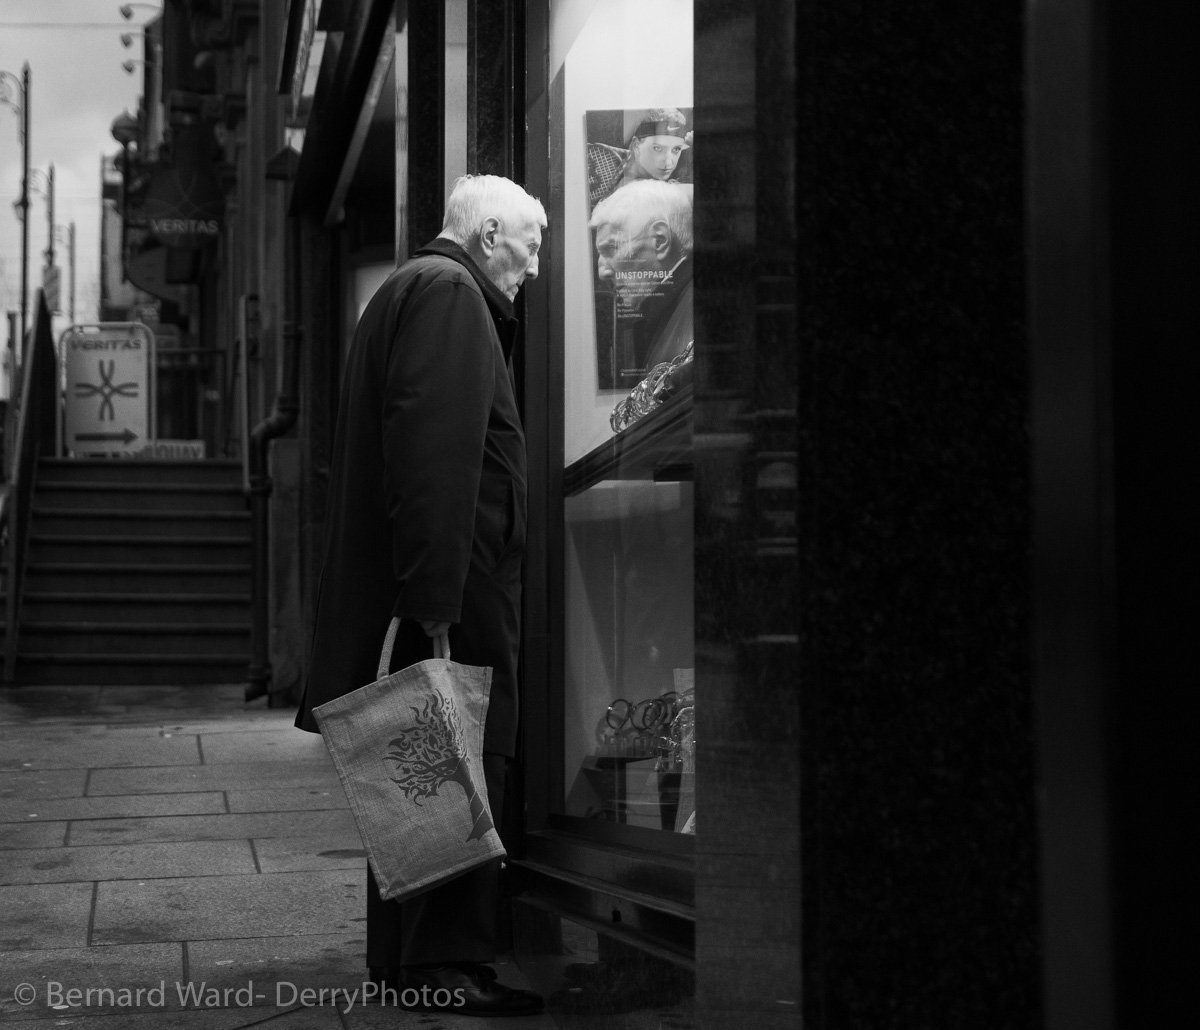 Derry street photography archives - 2014 'Window Shopping' Shipqay Street.

#Citygrammers #EverybodyStreet #FromStreetsWithLove #Gramslayers #IG_Street #LensCultureStreets #LensOnStreets #LiveFolk #PeopleInSquare #StoryOfTheStreet #StreetGrammer #StreetLife #StreetMagazine #derry